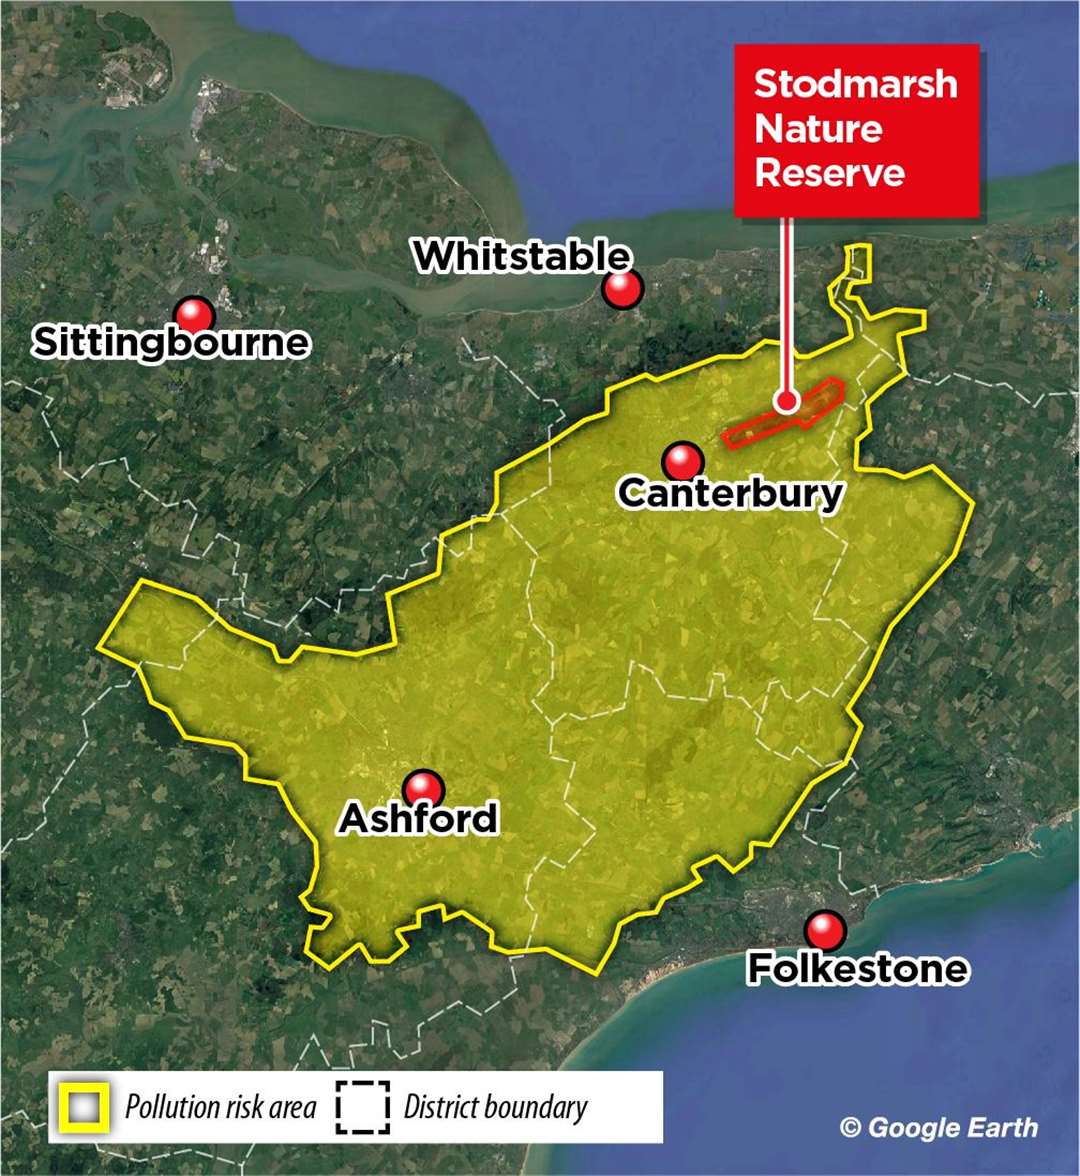 Map showing the 'catchment area', in yellow, for the Stodmarsh nature reserve, which is marked in red